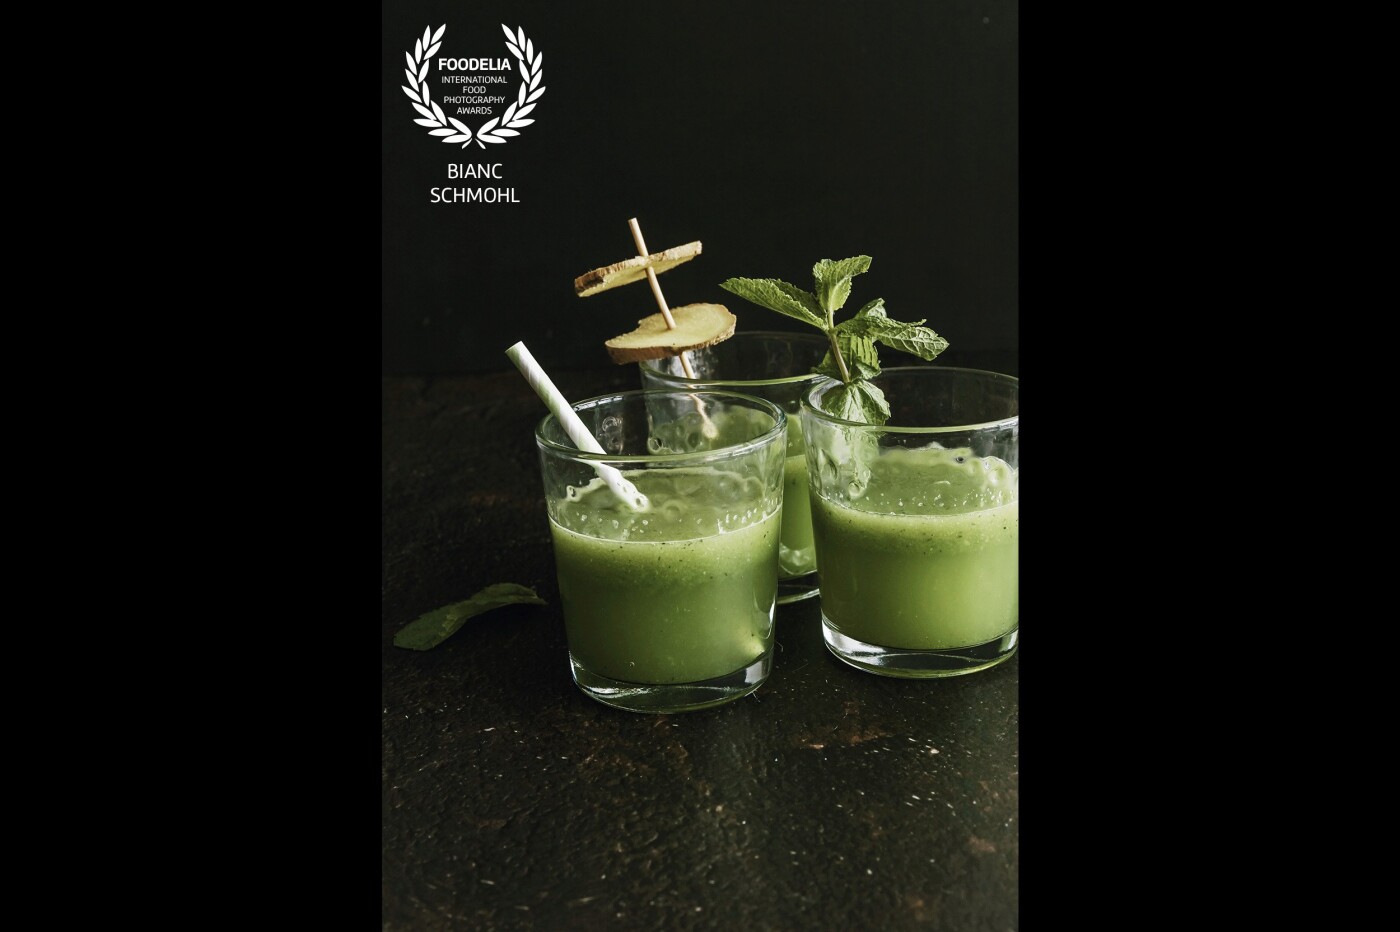 Green healthy summer drinks. Your best friend on hot days, at home or on the beach. Decorating the glasses with fresh ginger and mint twigs brings a lot of happiness and joy in the photo.